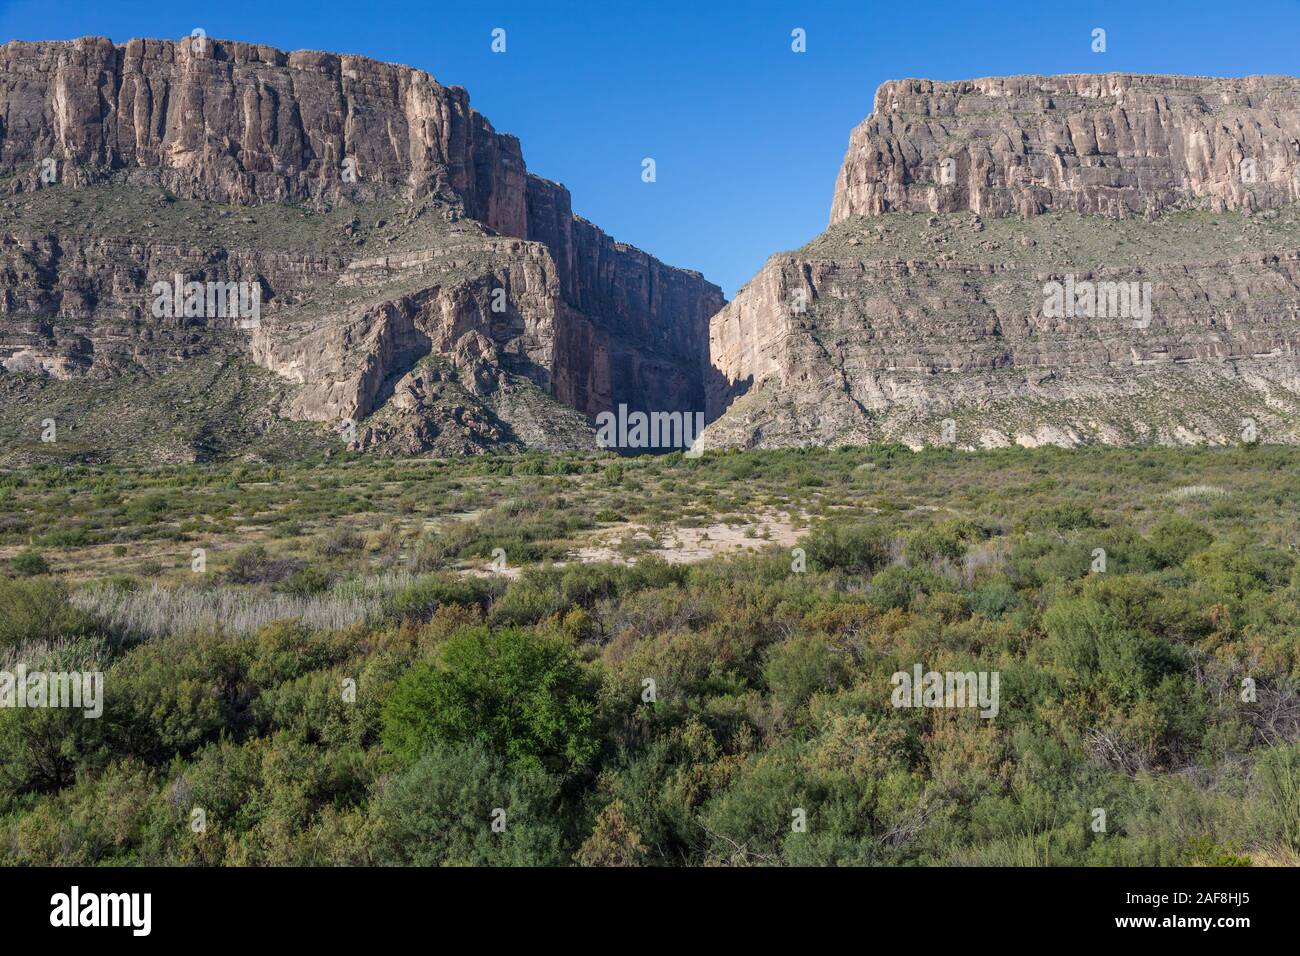 Exit from Santa Elena Canyon, Big Bend National Park, Texas. Mexico on left, USA on right. Stock Photo